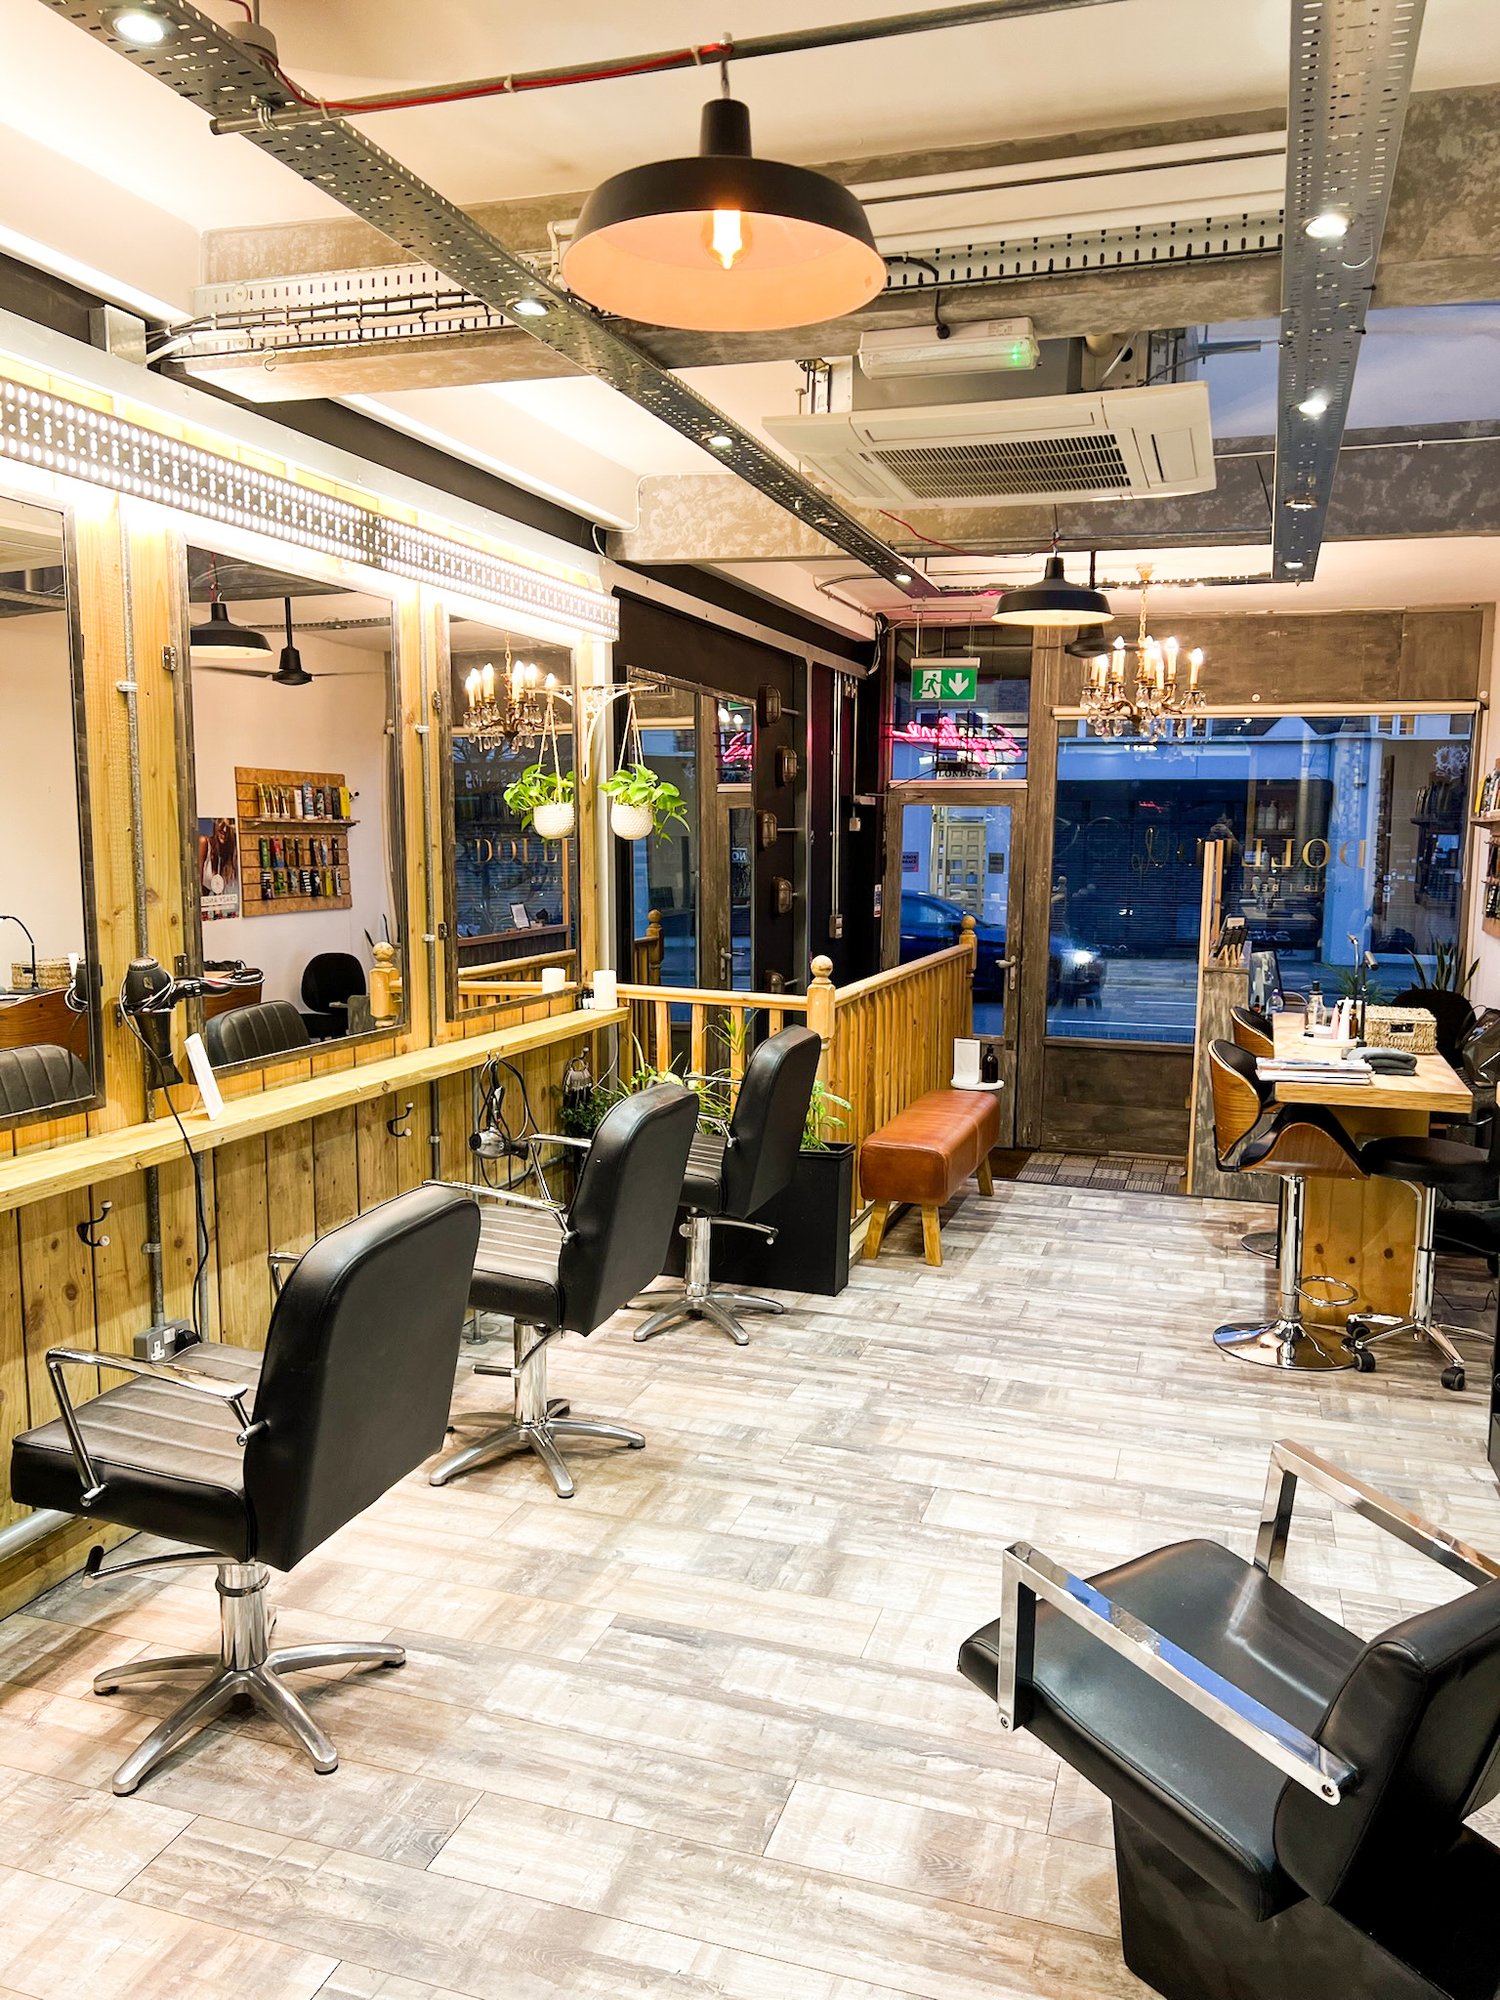 Dolled Up Salon | Hair, Beauty and Tanning Salon in East London | Hackney and Shoreditch Area